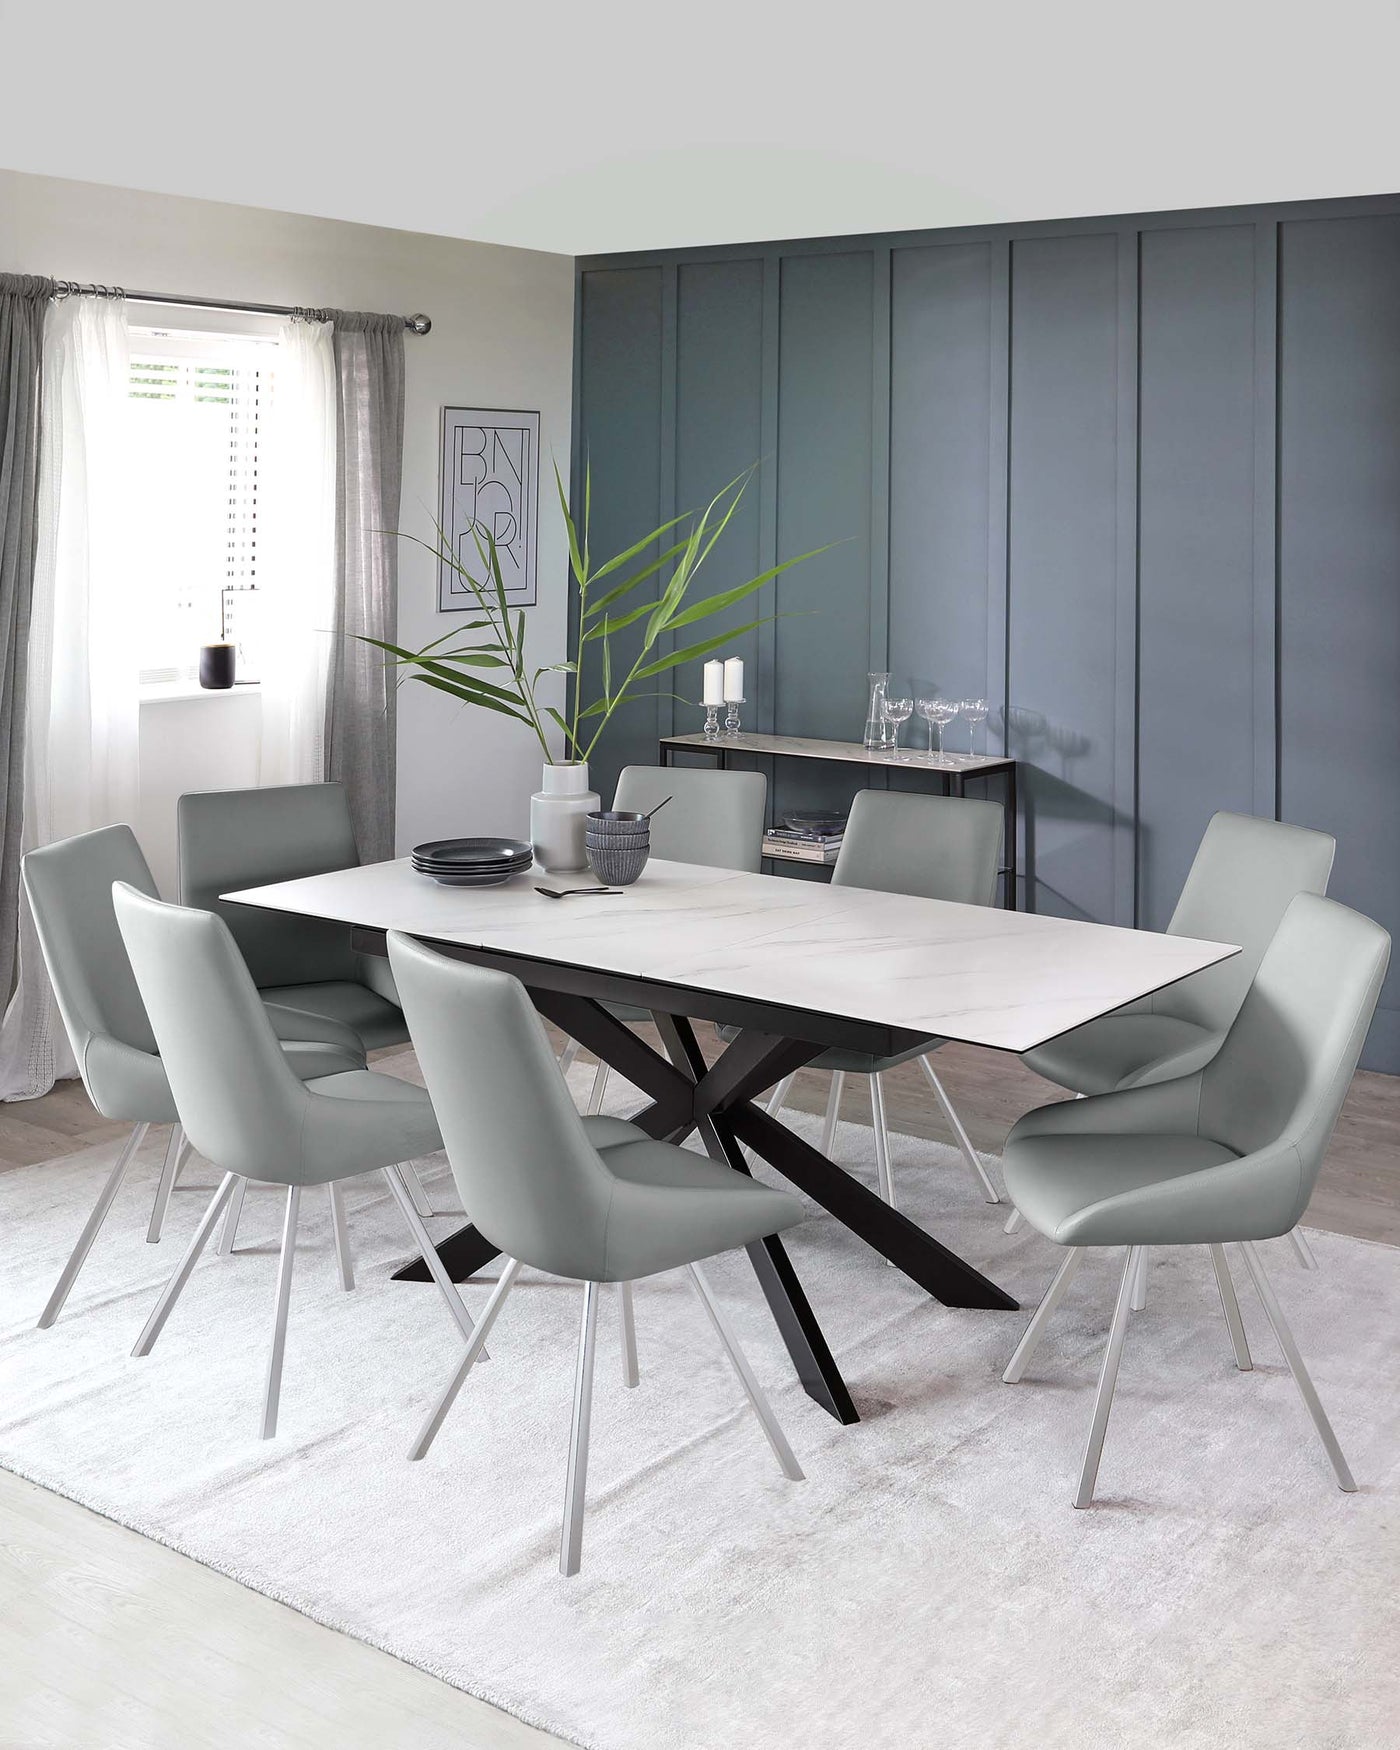 Modern dining room set featuring a rectangular table with a light-coloured tabletop and a striking dark angular base. Surrounding the table are six contemporary-style chairs with sleek light grey upholstery and slender metal legs. The set is displayed on a soft white area rug.